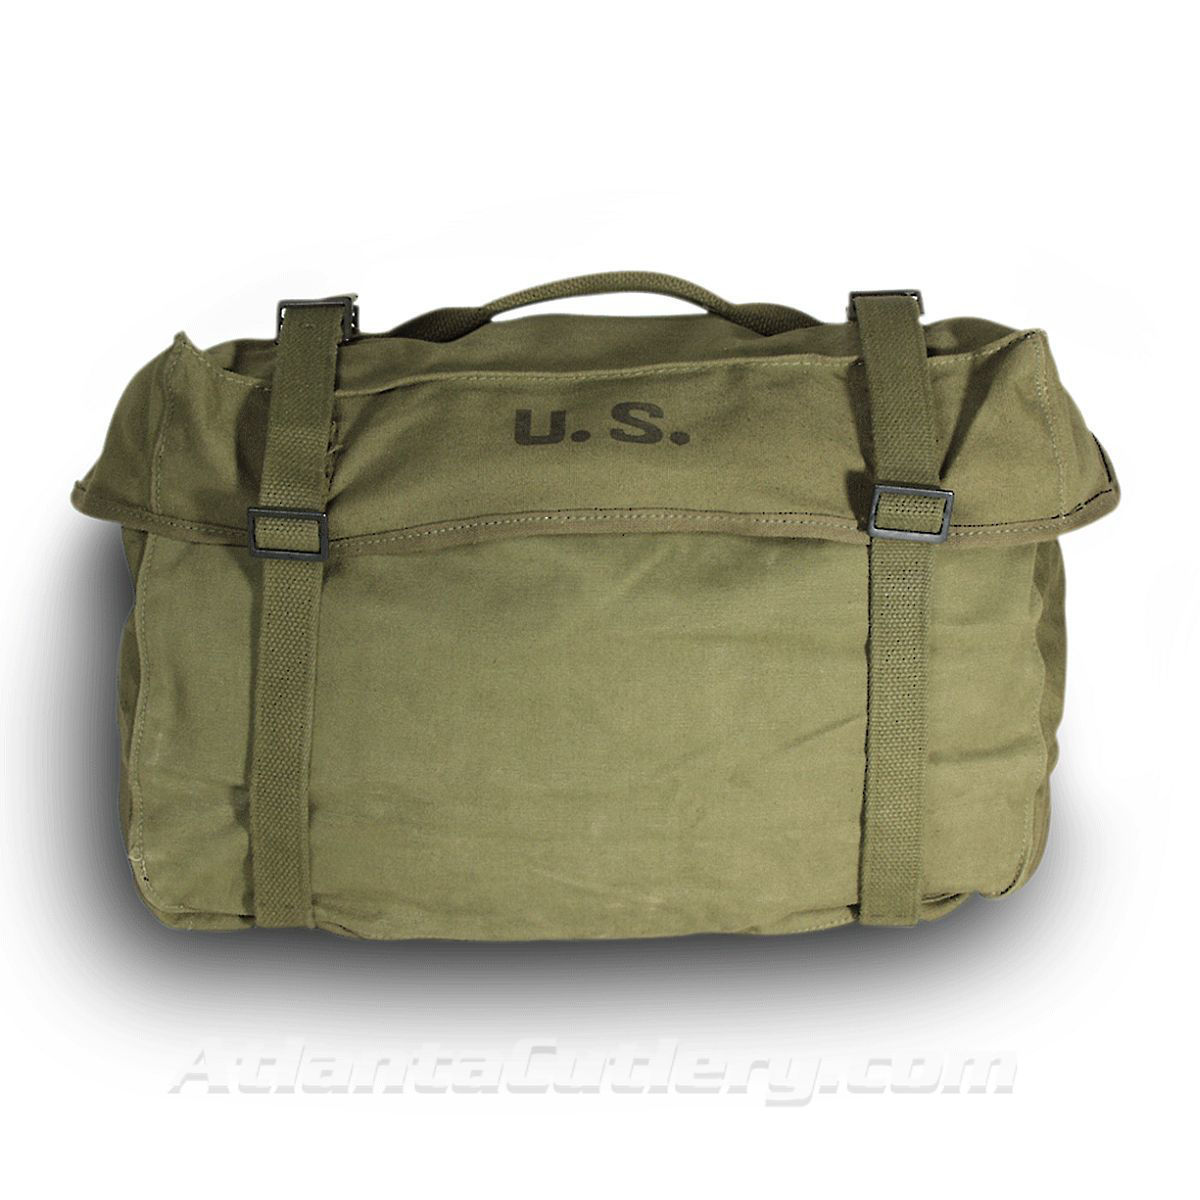 Military Surplus US GI M1945 Cargo Bag from the 1950s! Excellent shape with some scuffling, has straps and a carry handle